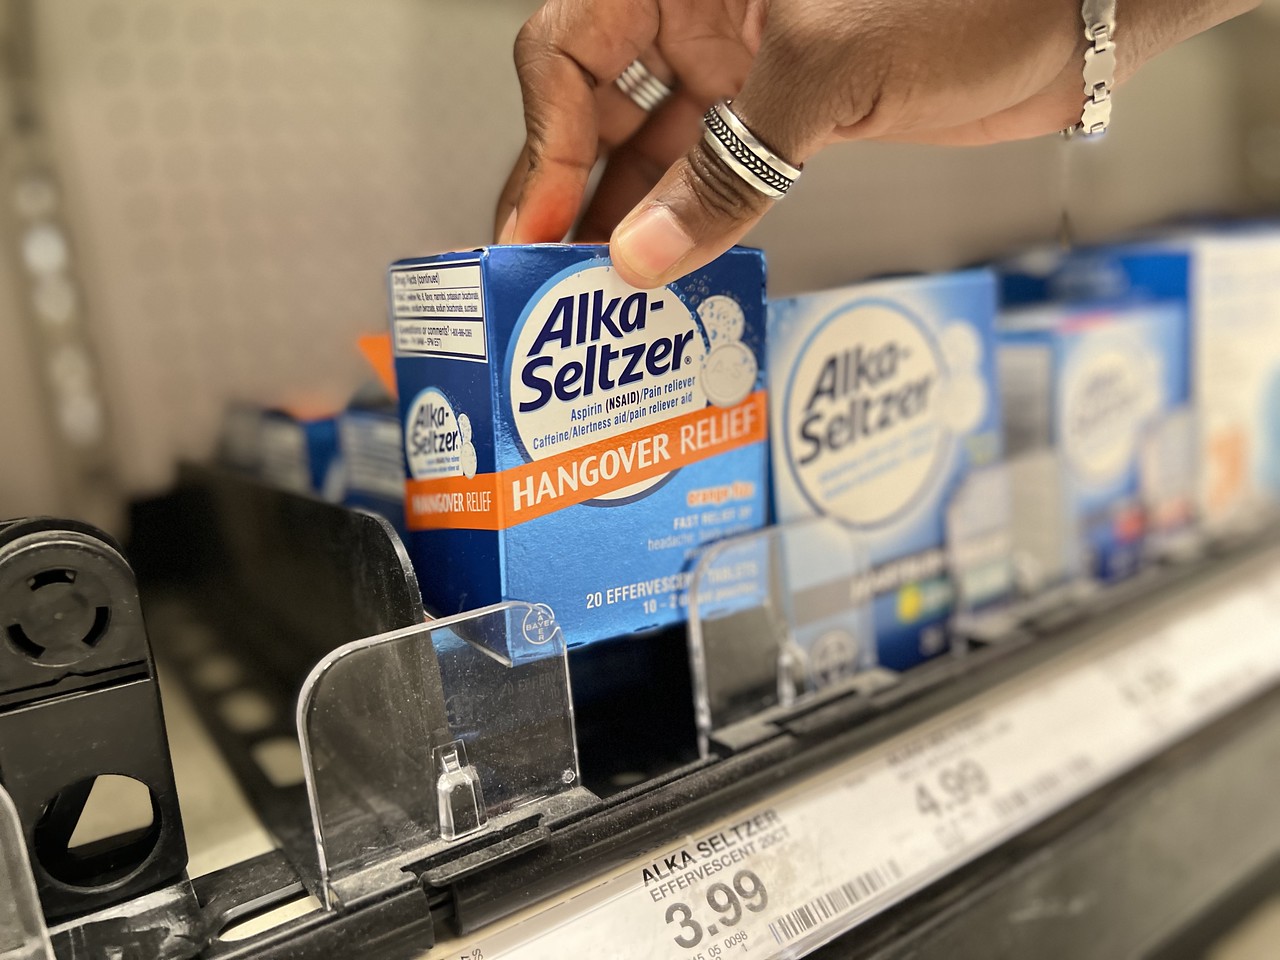 hand lifting a box of Alka Seltzer Hangover Relief off a target store shelf